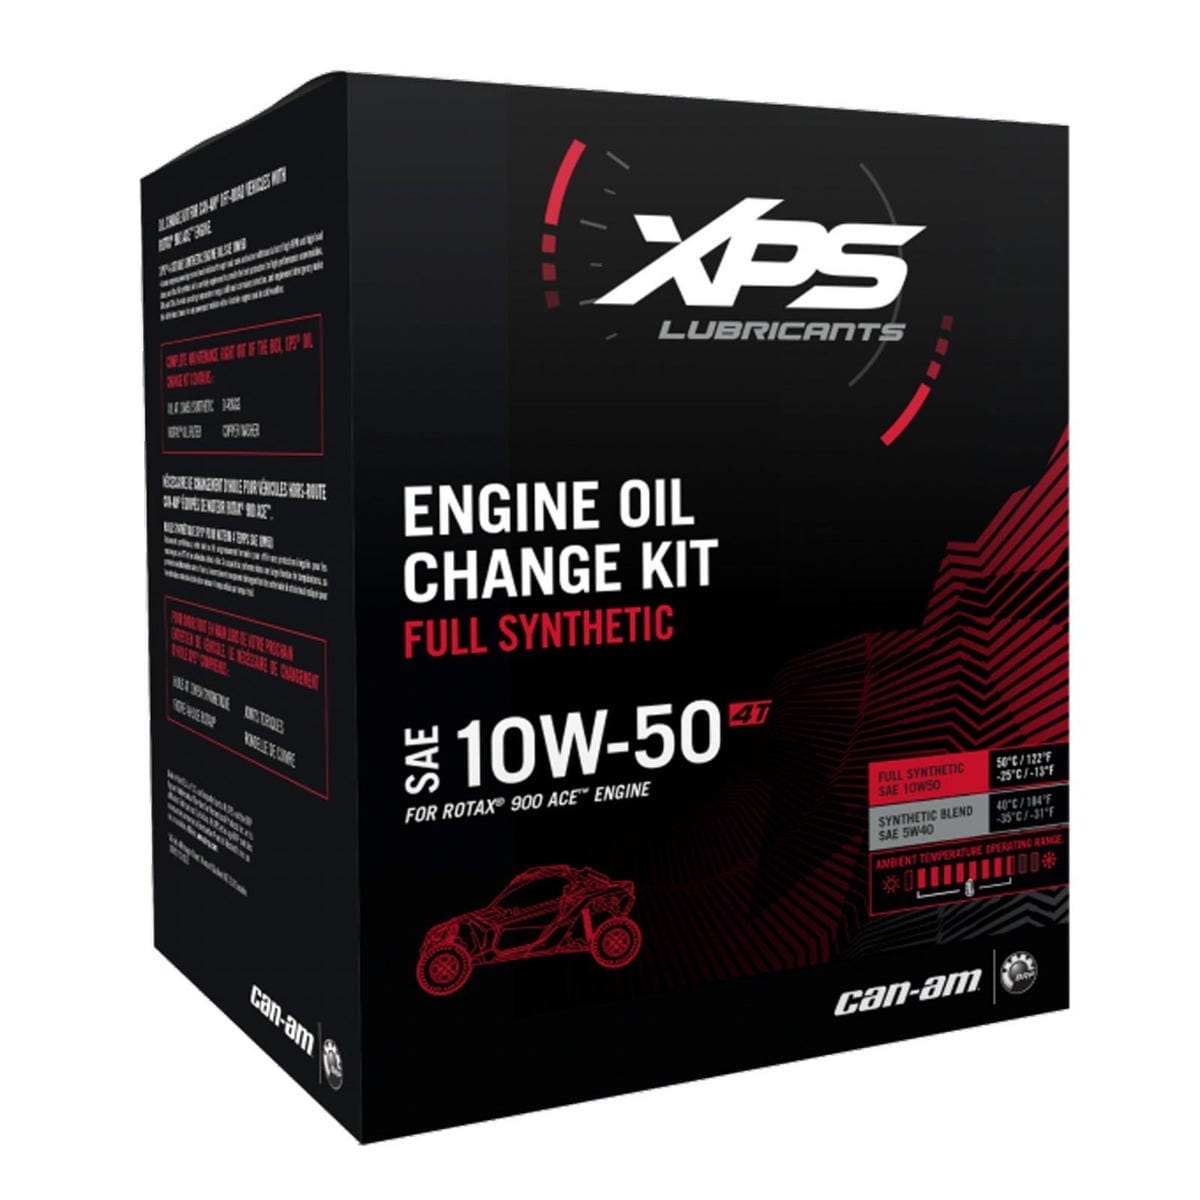 4T 10W-50 Synthetic Oil Change Kit for Rotax 900 ACE engine